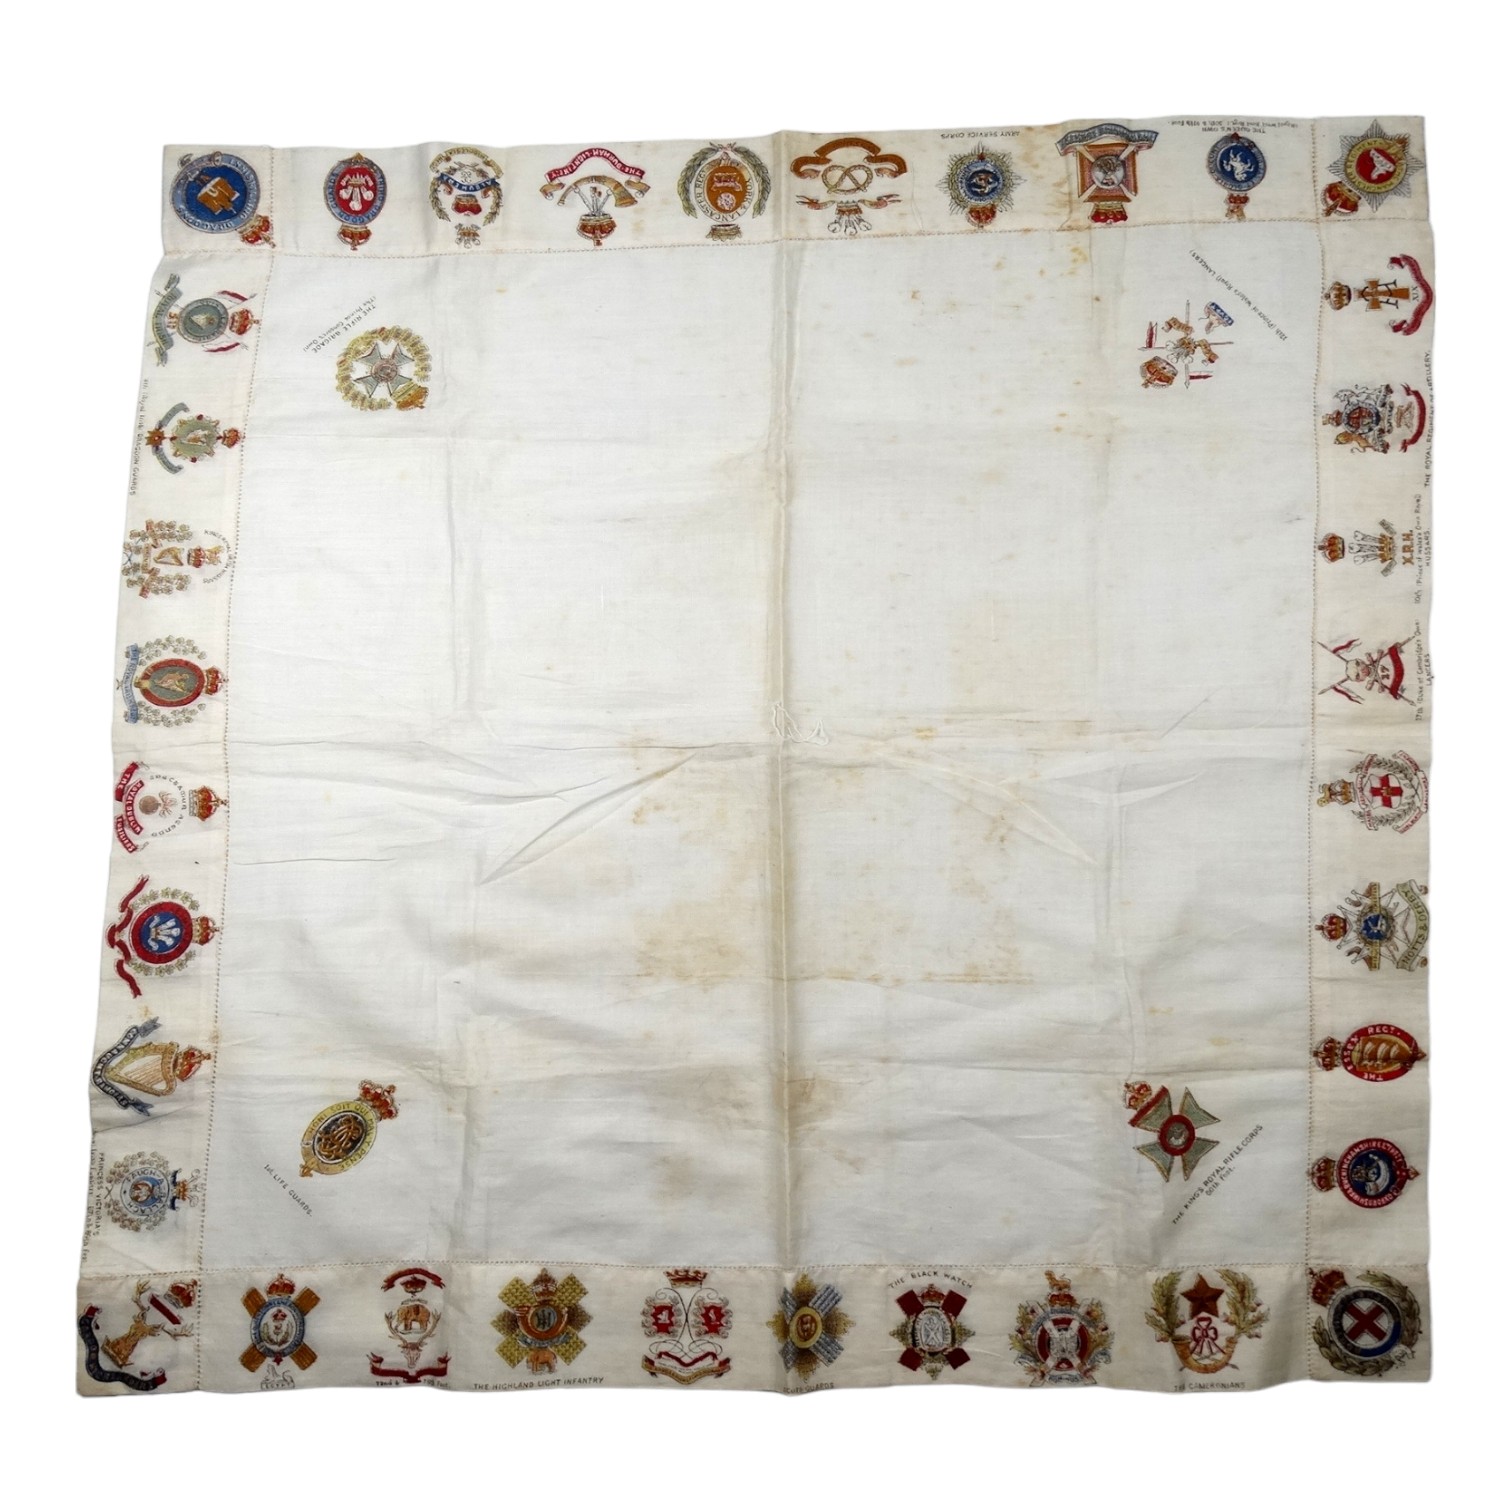 An early 20th century sweetheart handkerchief - blue silk and embroidered 'Go My Dear Sweetheart', - Image 5 of 8